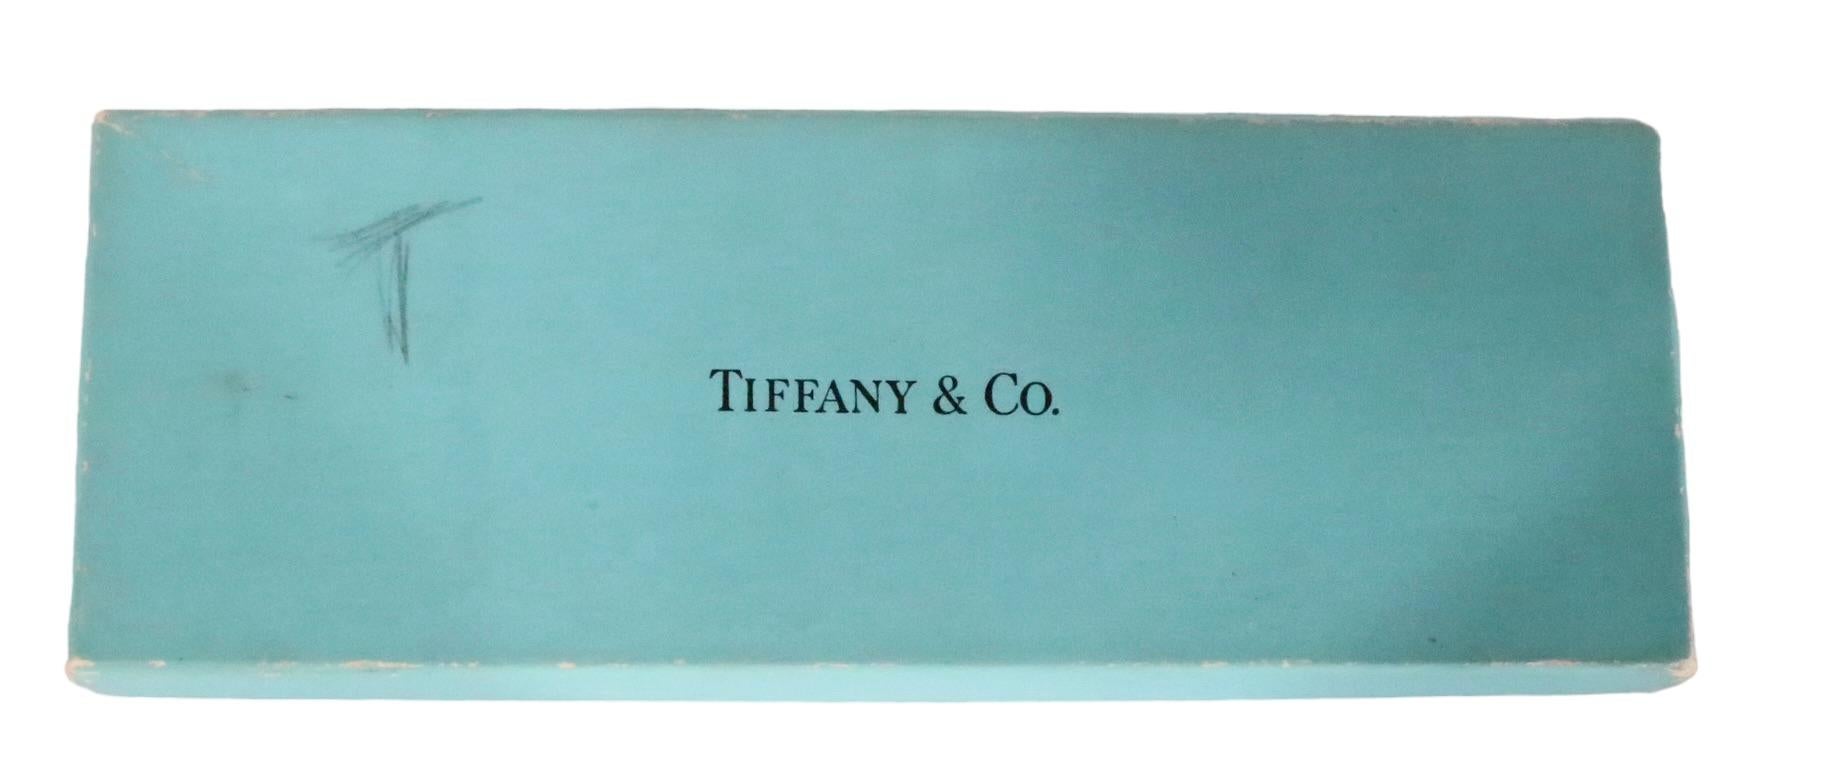 20th Century Tiffany Silver Money Clip Sterling # 23956 with a Box and Pouch